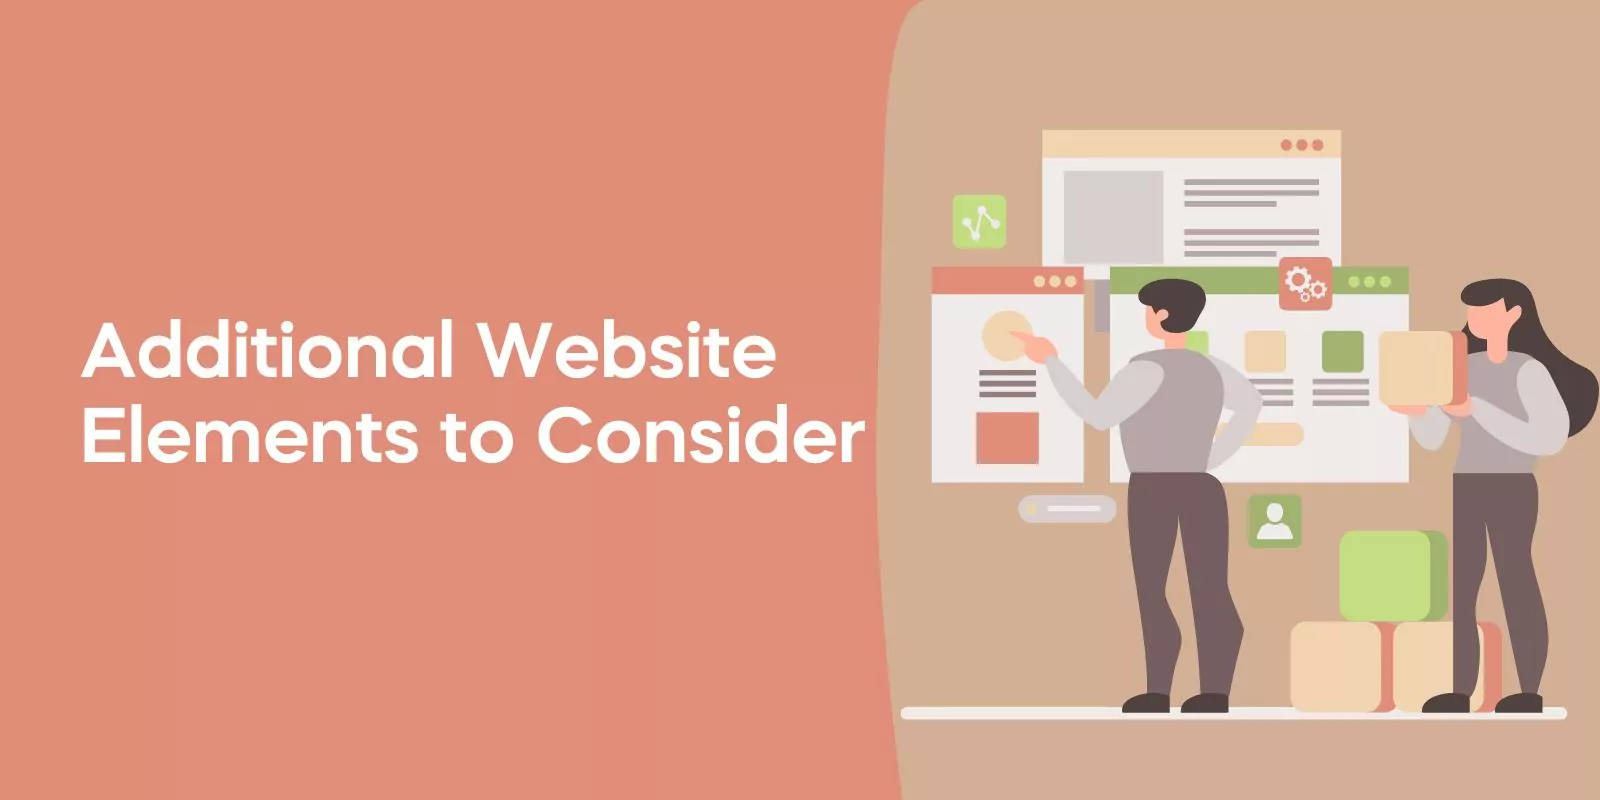 Additional Website Elements to Consider